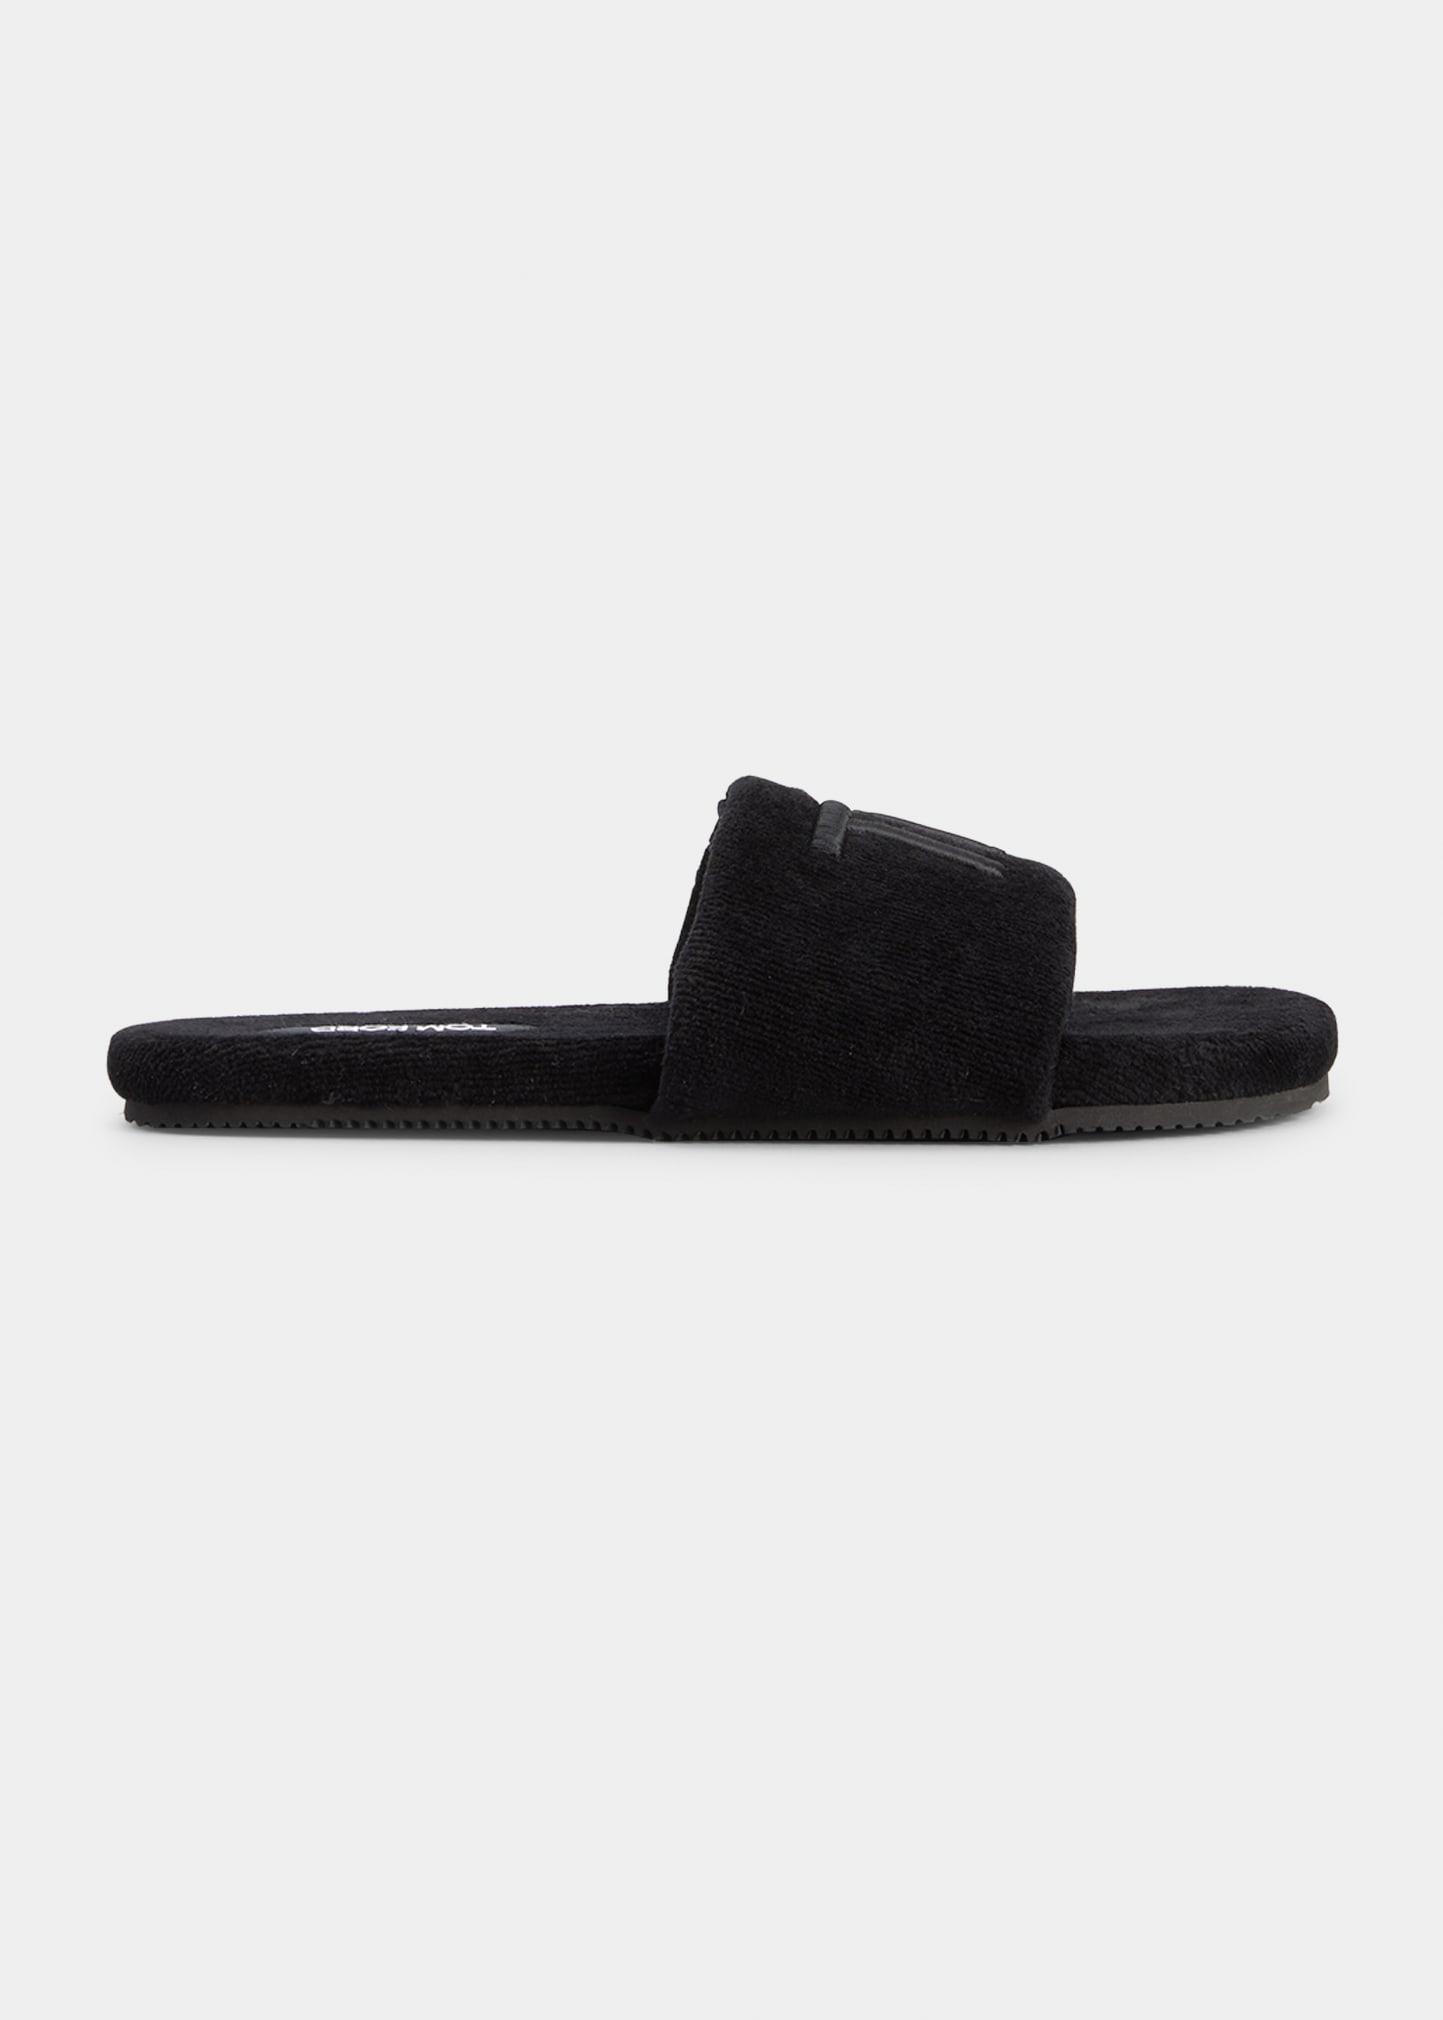 Tom Ford Harrison Terrycloth Sandals in Black for Men | Lyst